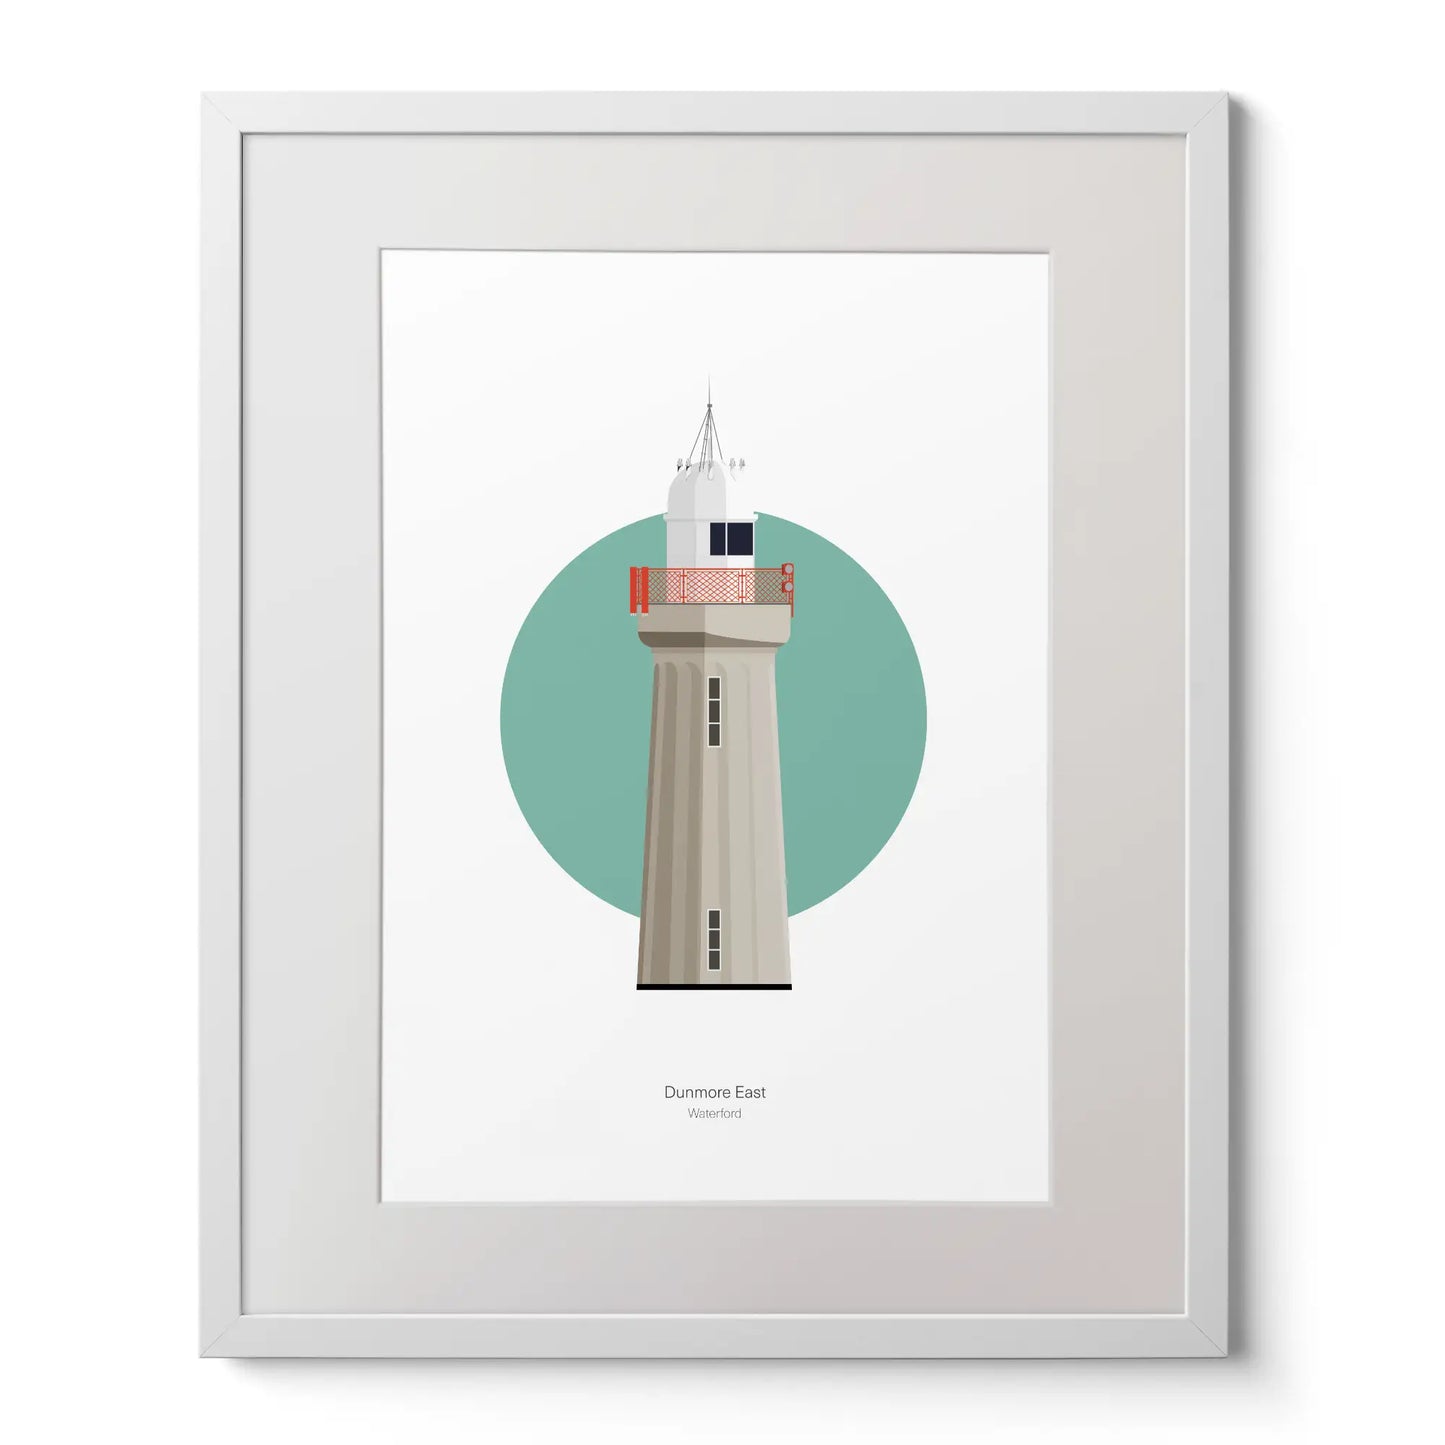 Illustration of Dunmore East lighthouse on a white background inside light blue square,  in a white frame measuring 40x50cm.